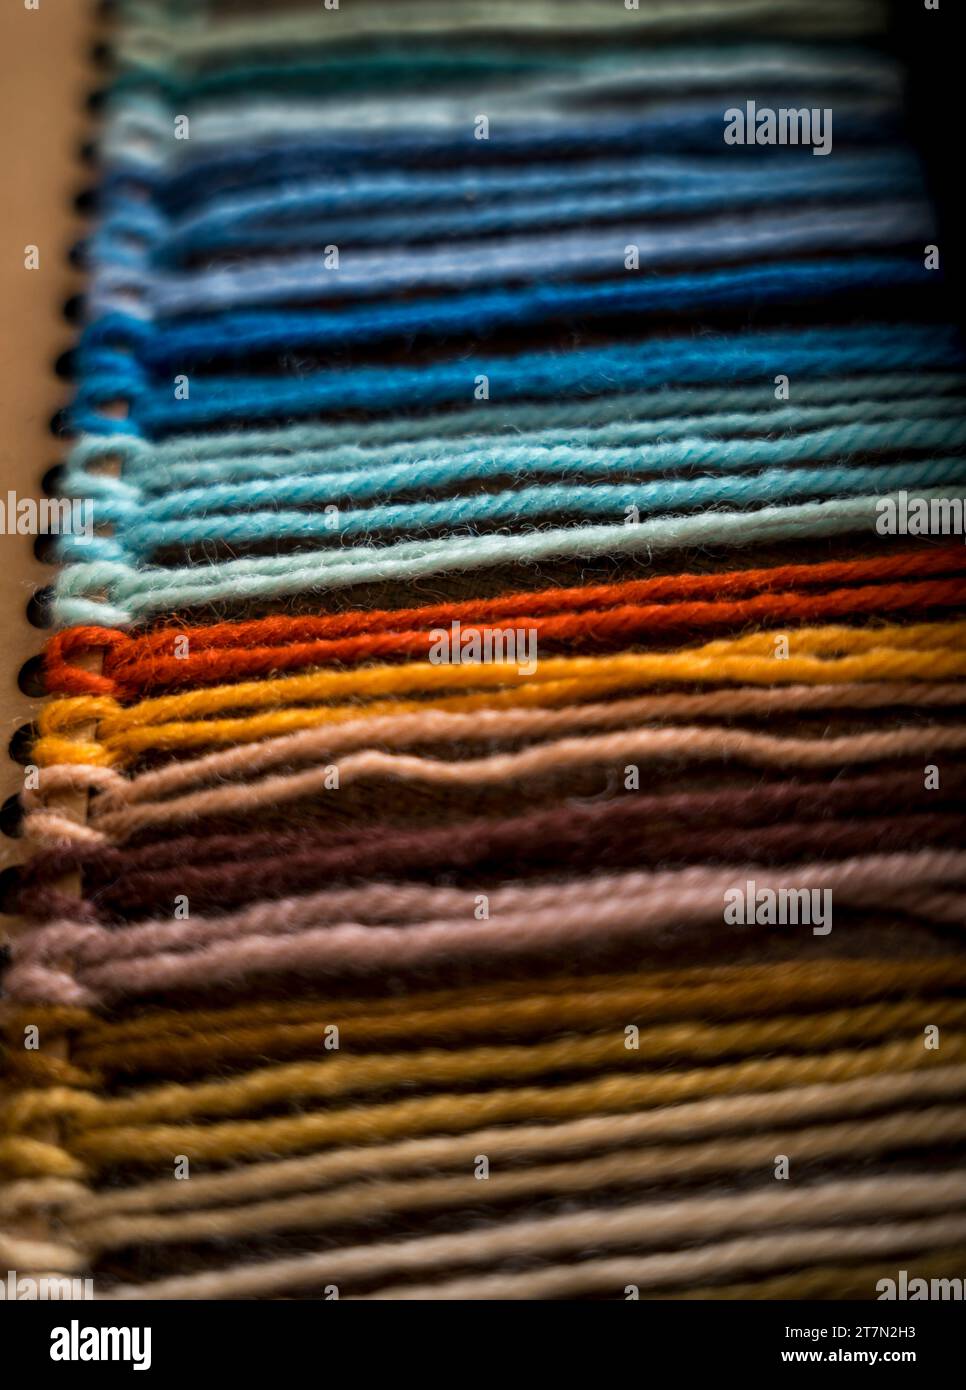 Close up of vibrant created from wool yarn in different colors Stock Photo